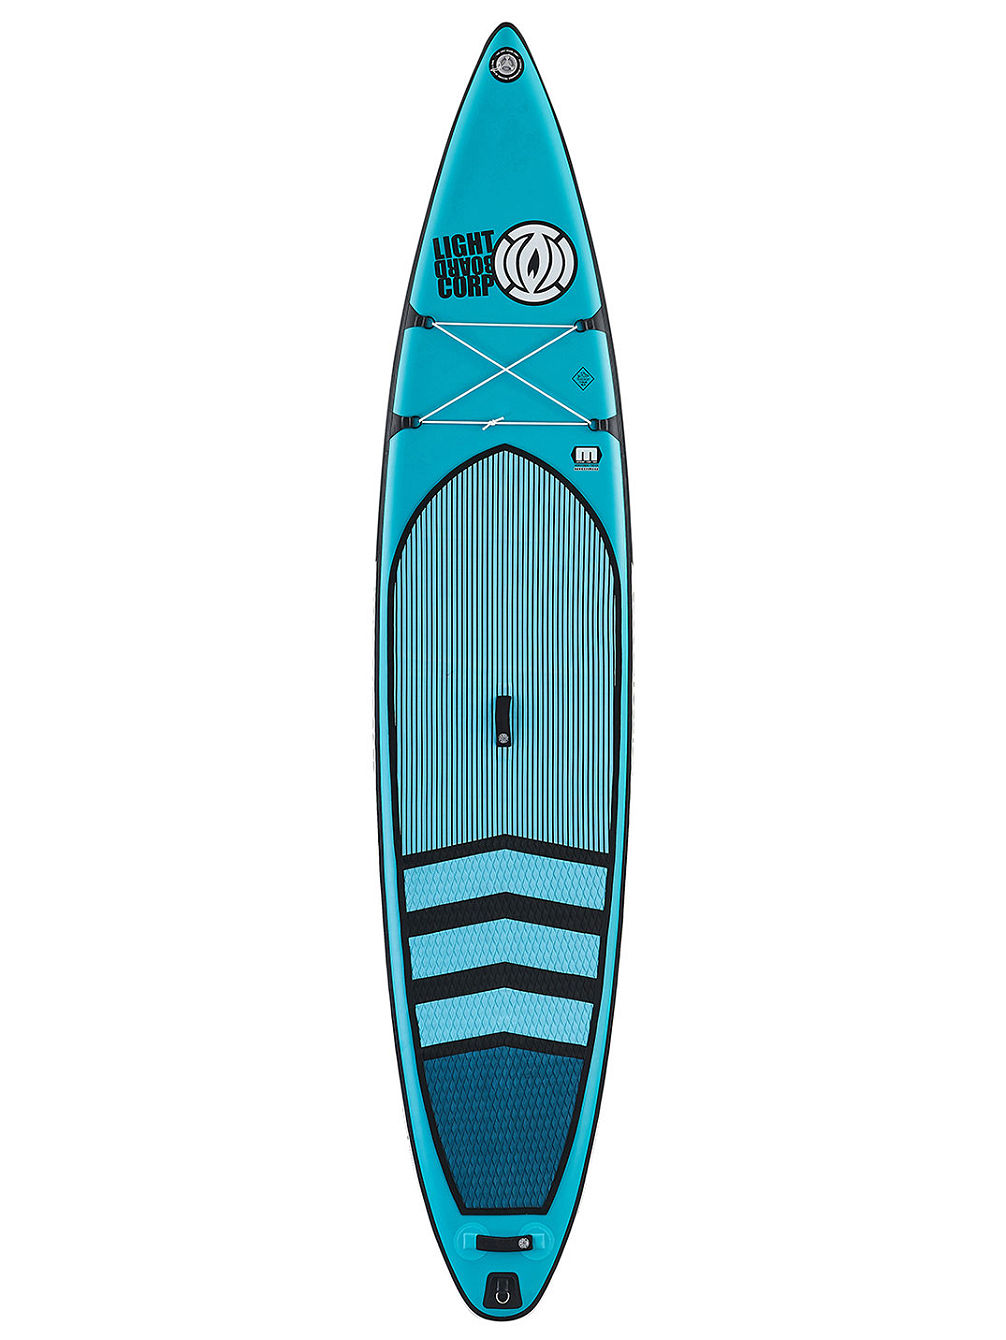 The Blue Series Tourer 12&amp;#039;6 SUP Board